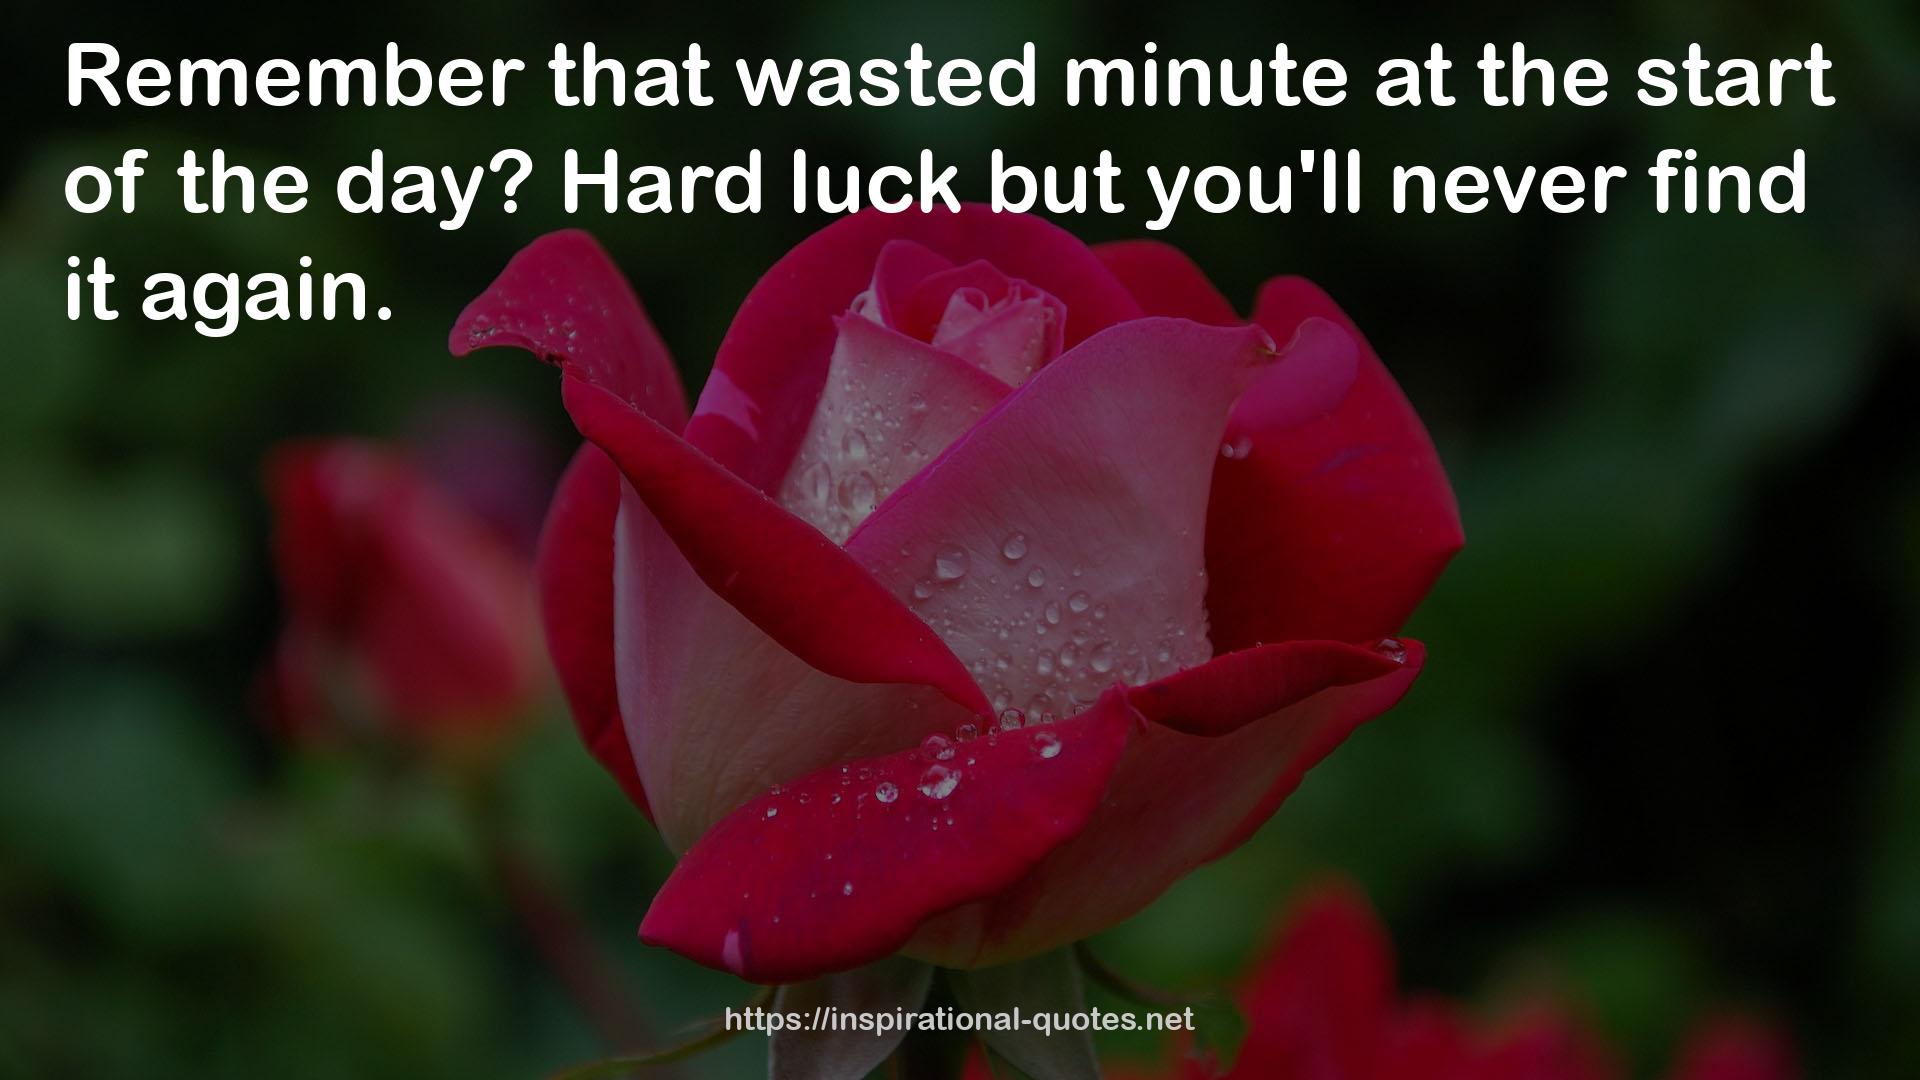 Hard luck  QUOTES